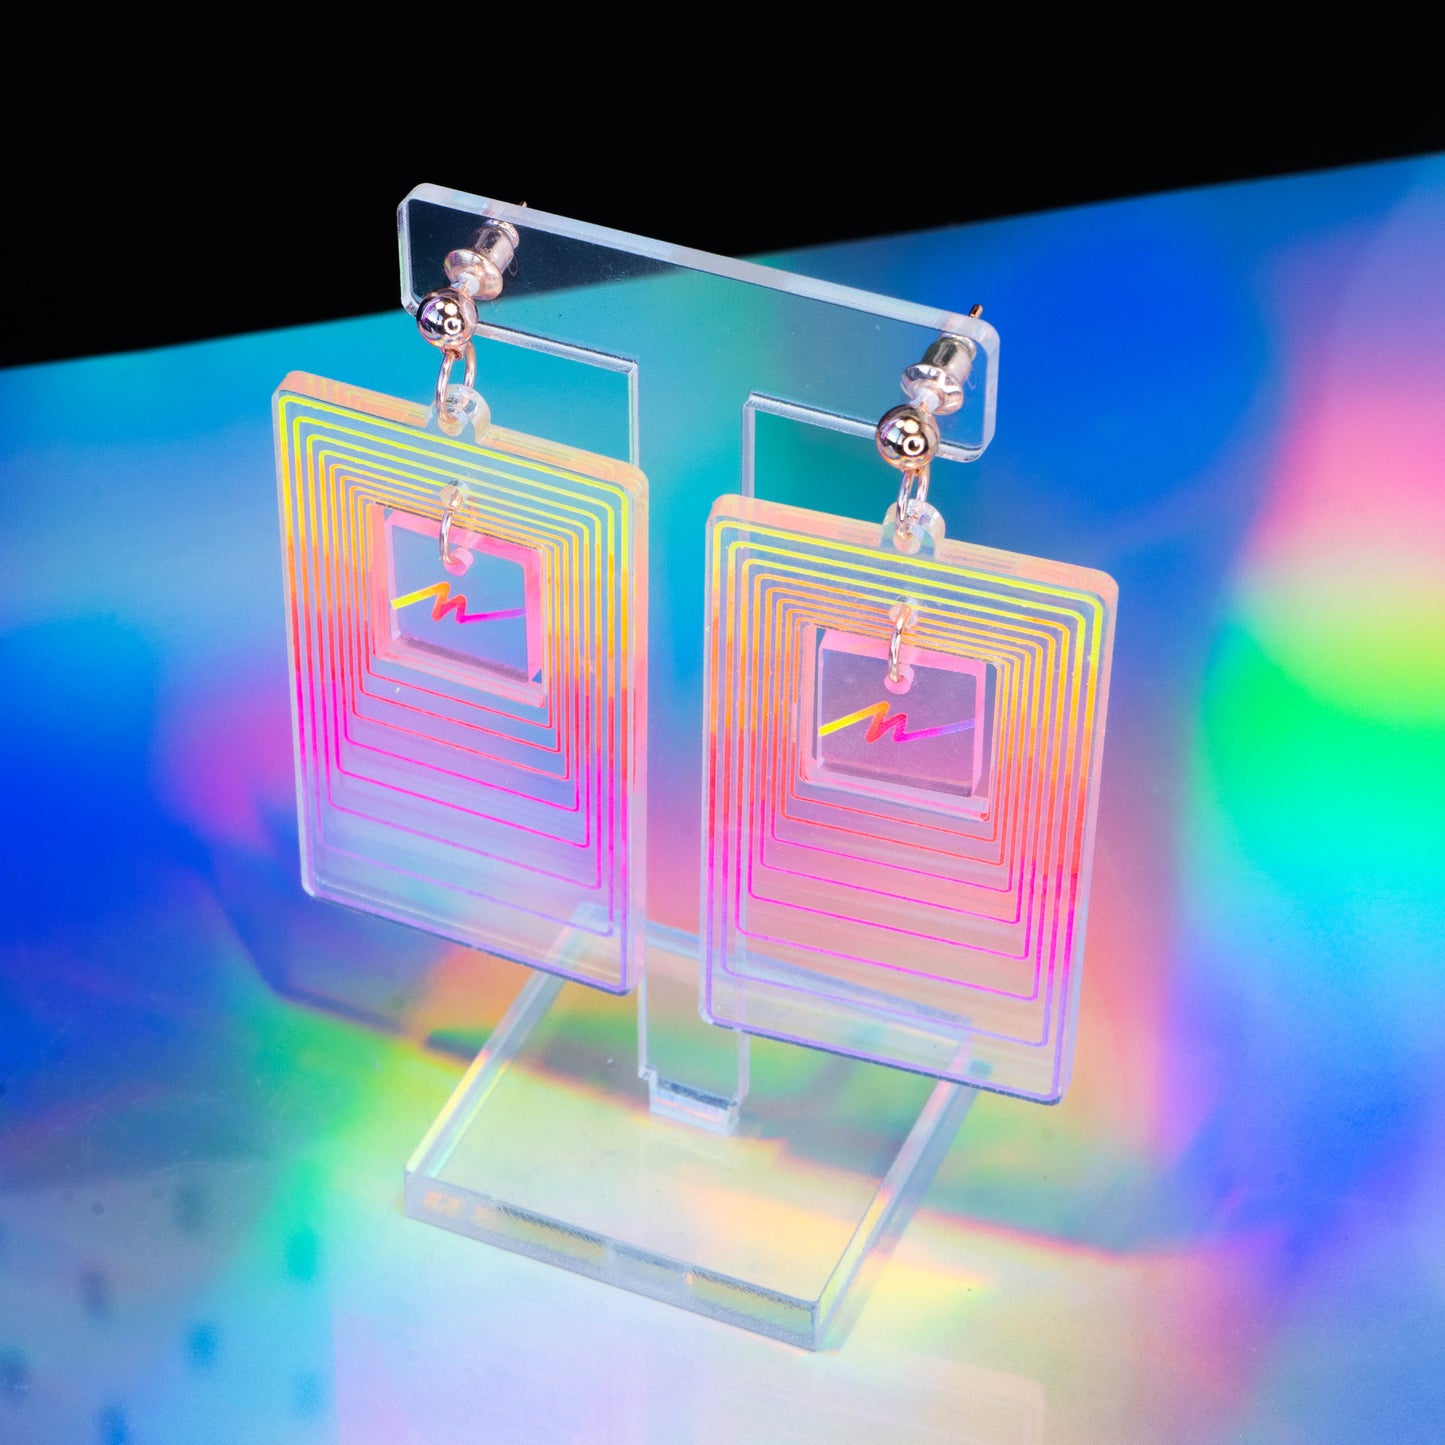 Holographic Void dangles